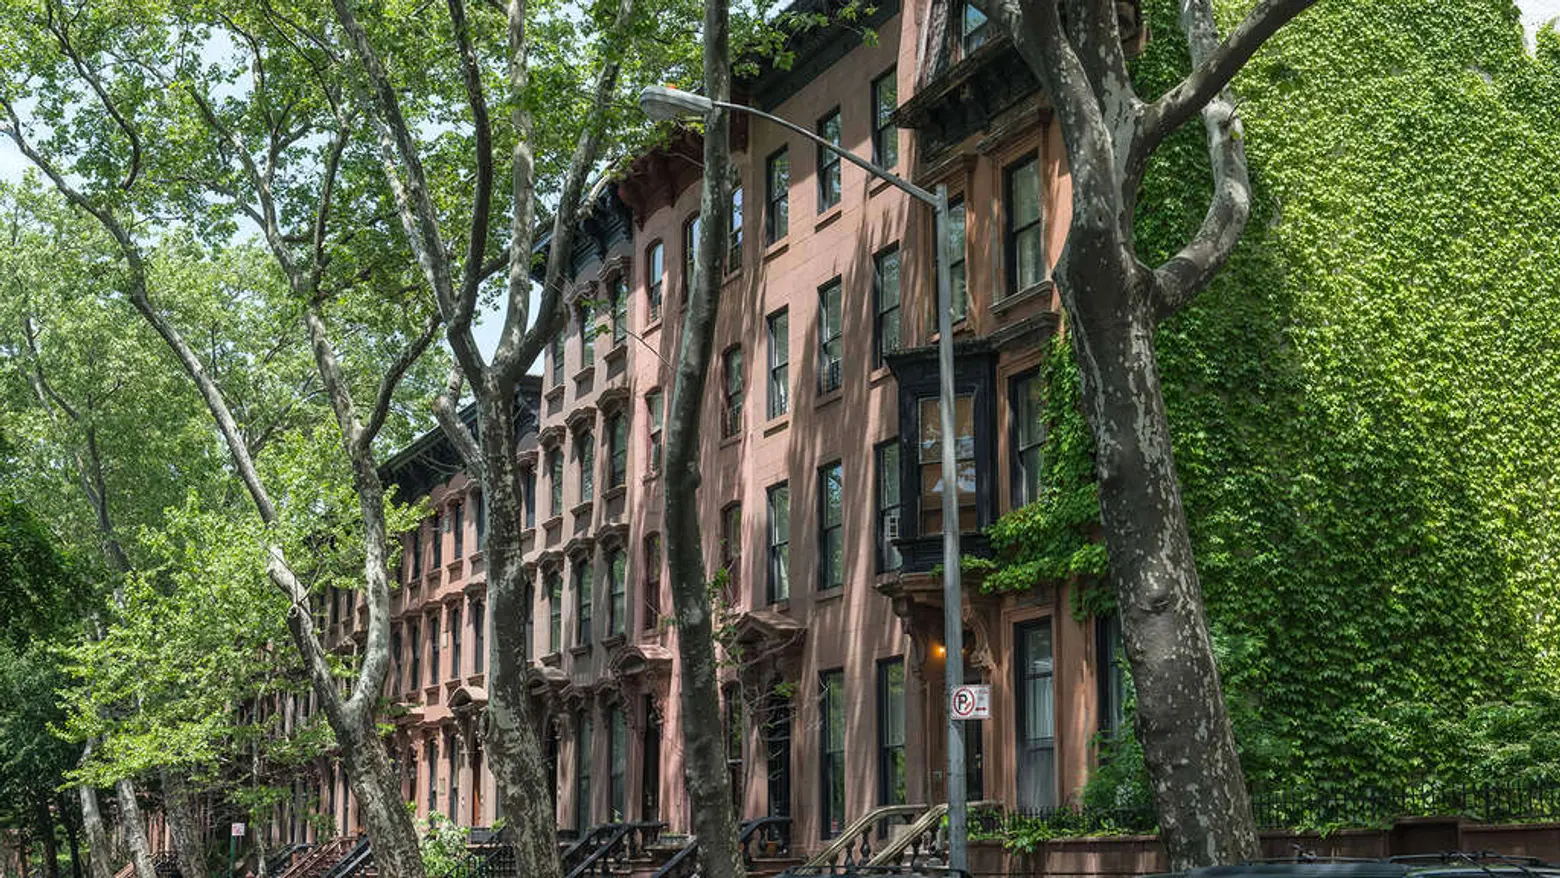 Take a jazz-filled tour of historic Fort Greene homes